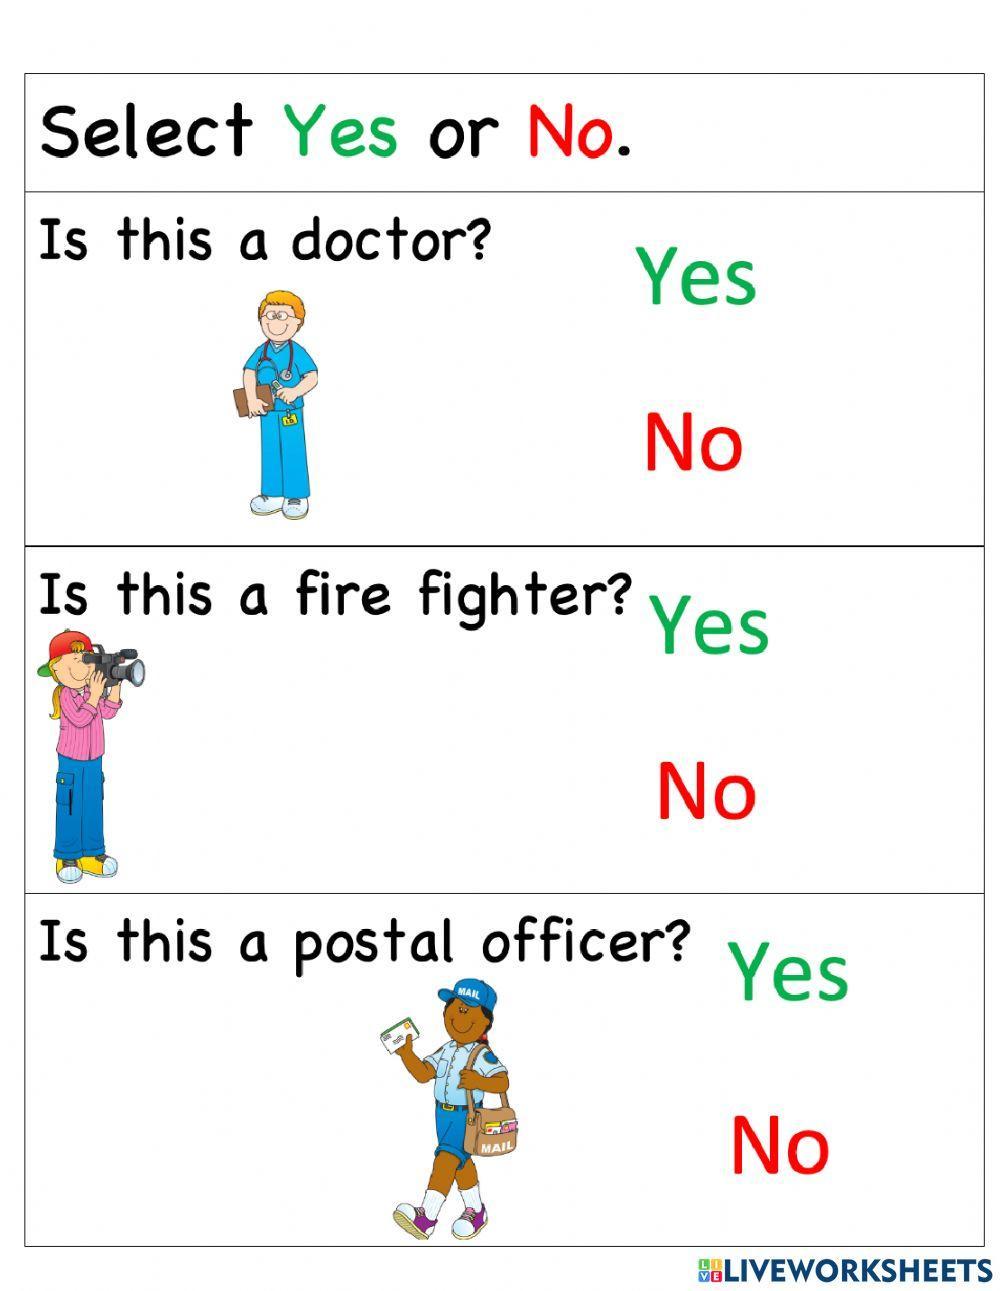 Community Workers - Select Yes or No for each picture 2